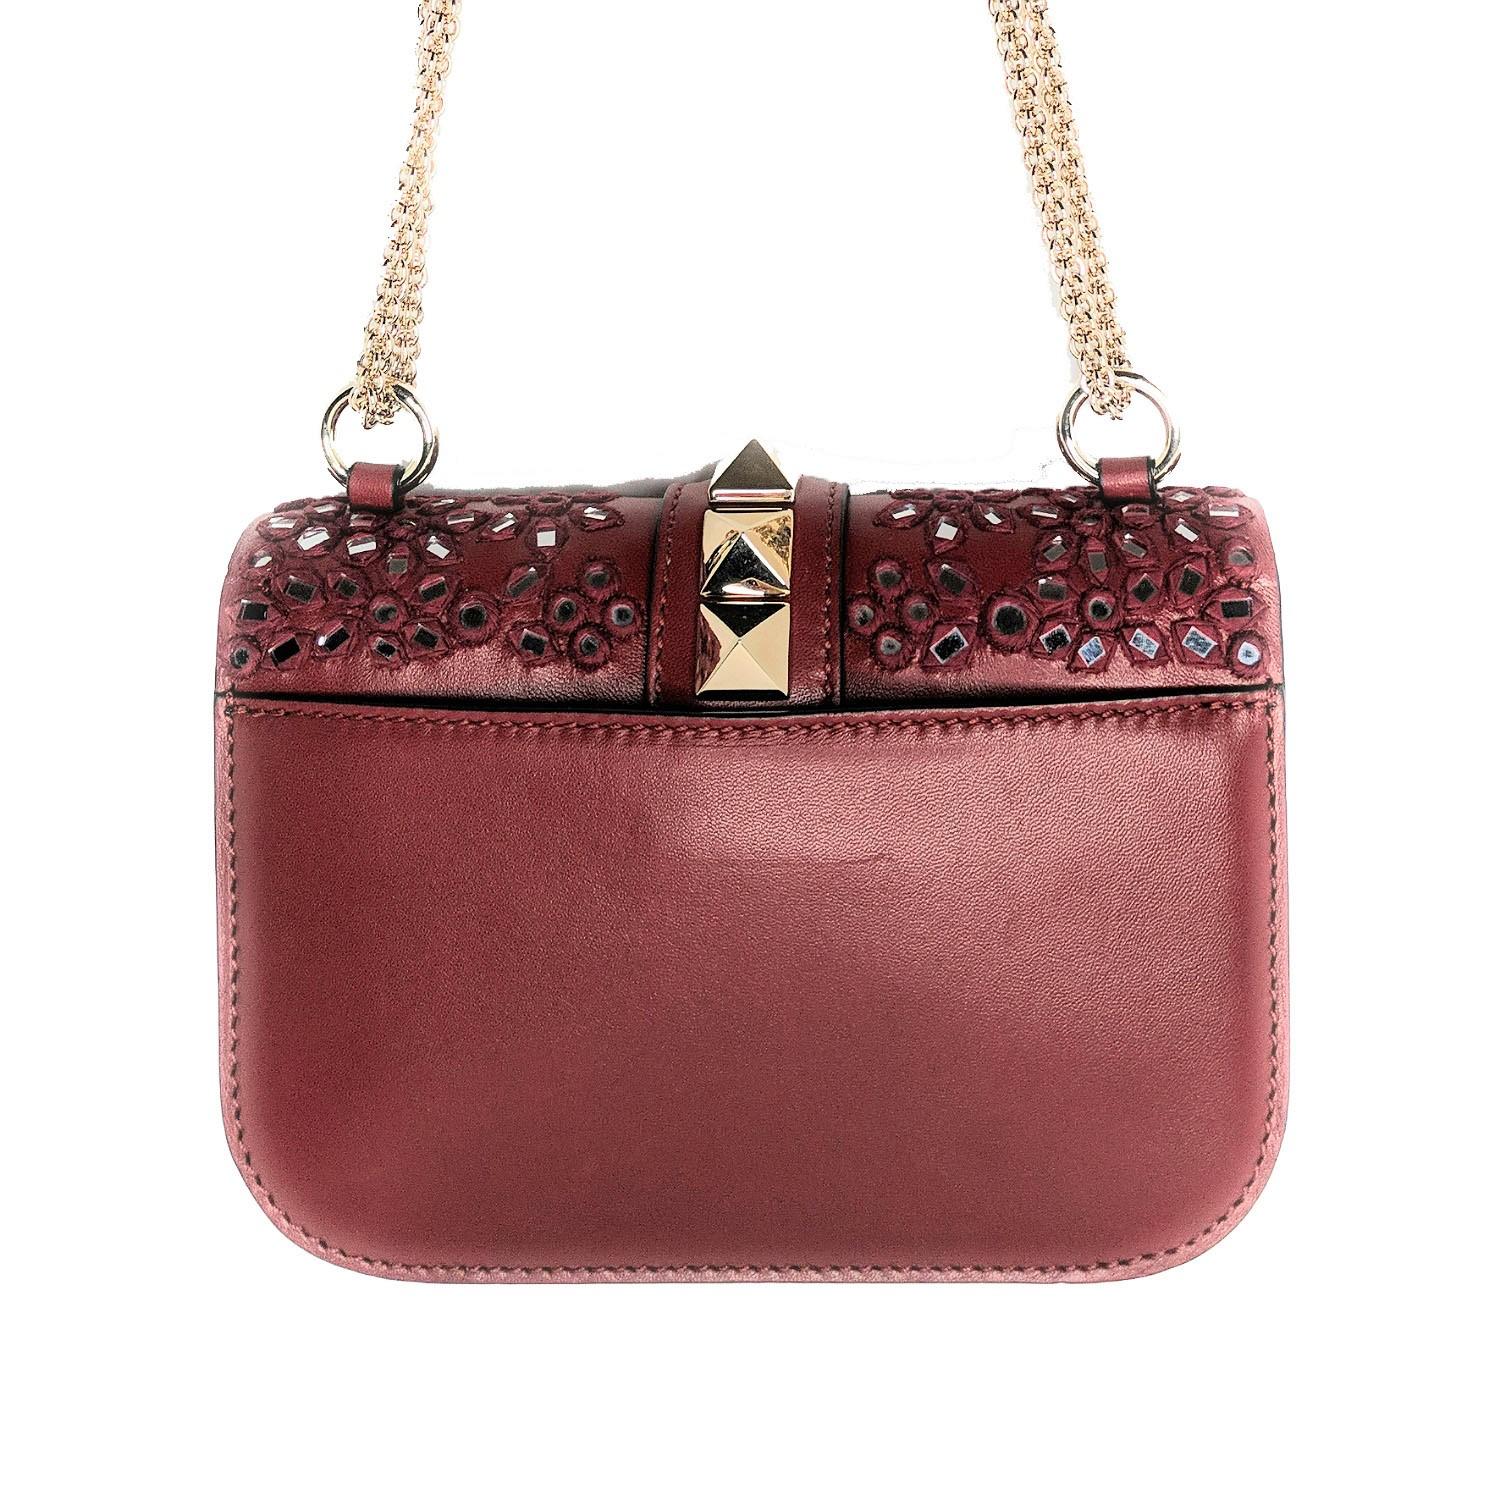 This stylish shoulder bag is crafted of luxuriously smooth lambskin leather in dark red with extensive hand-embroidered floral embellishments with mirror mosaics. The bag features a bijoux gold chain shoulder strap and signature Valentino large gold